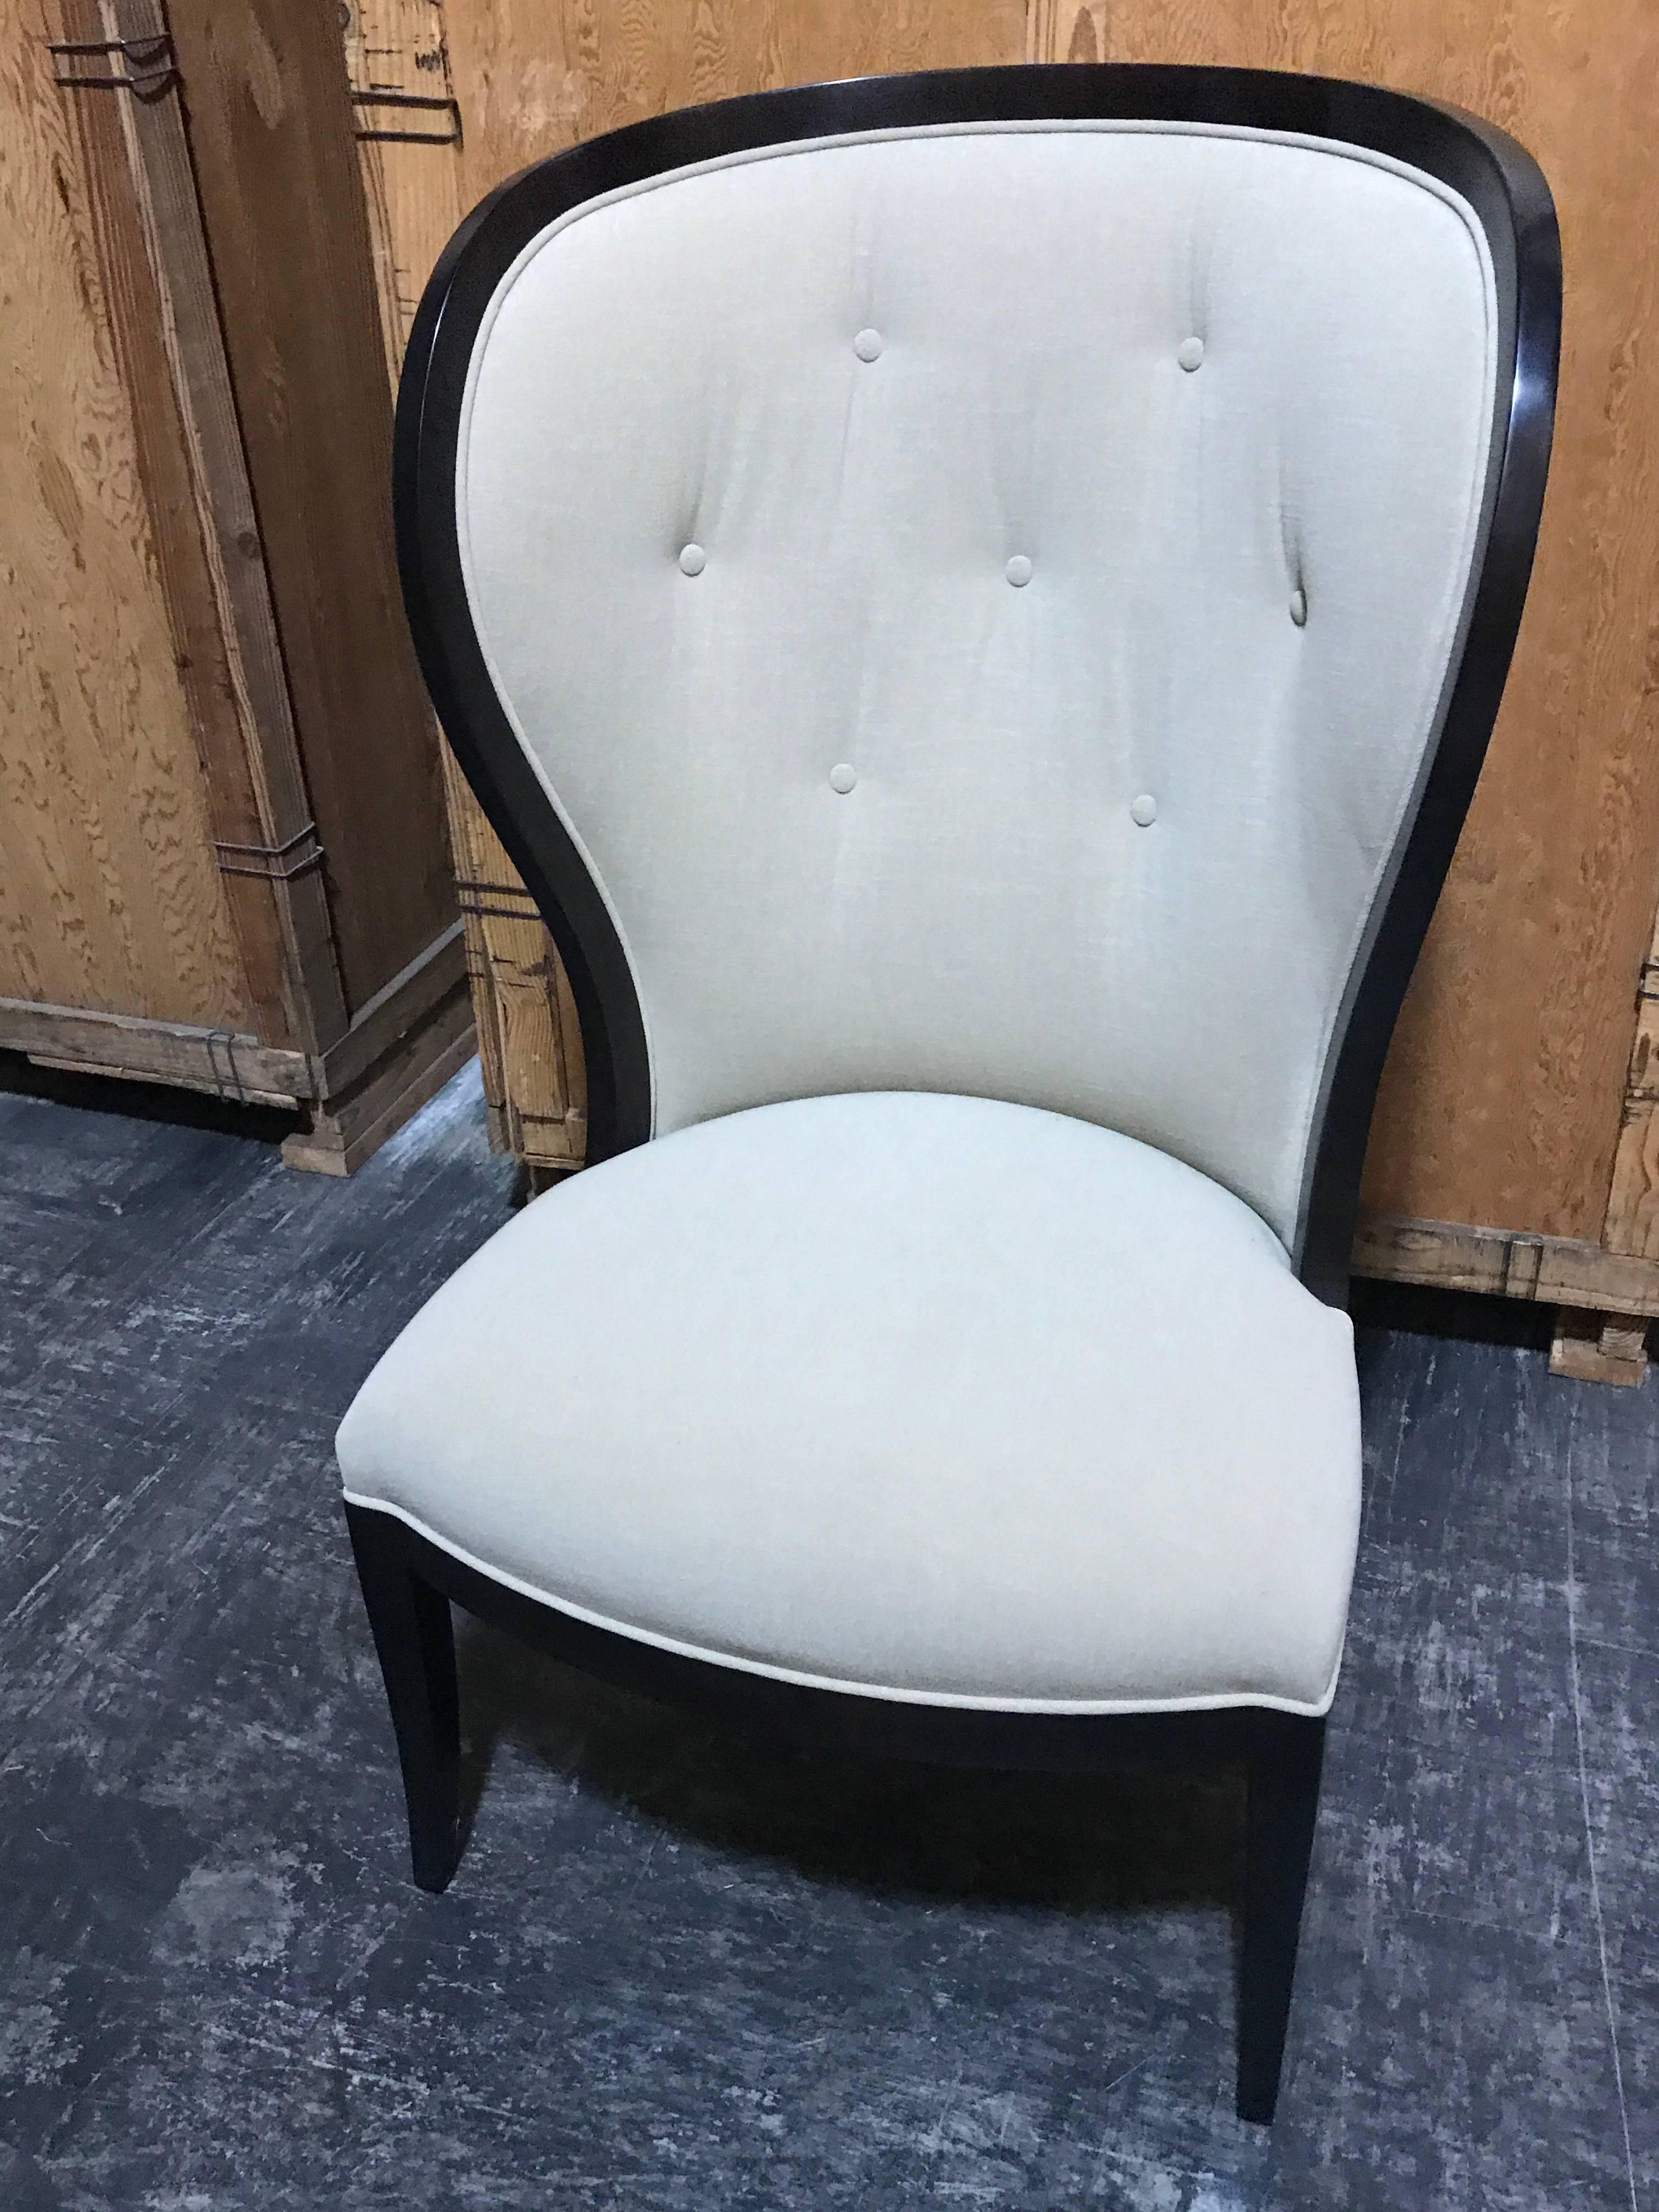 Lucien Rollins Collection Art Deco Fan Back Occasional Chair by William Switzer with mahogany “leaf” motif back. The item is a floor sample in excellent condition. Presently this item is at our Palm Beach Location.
